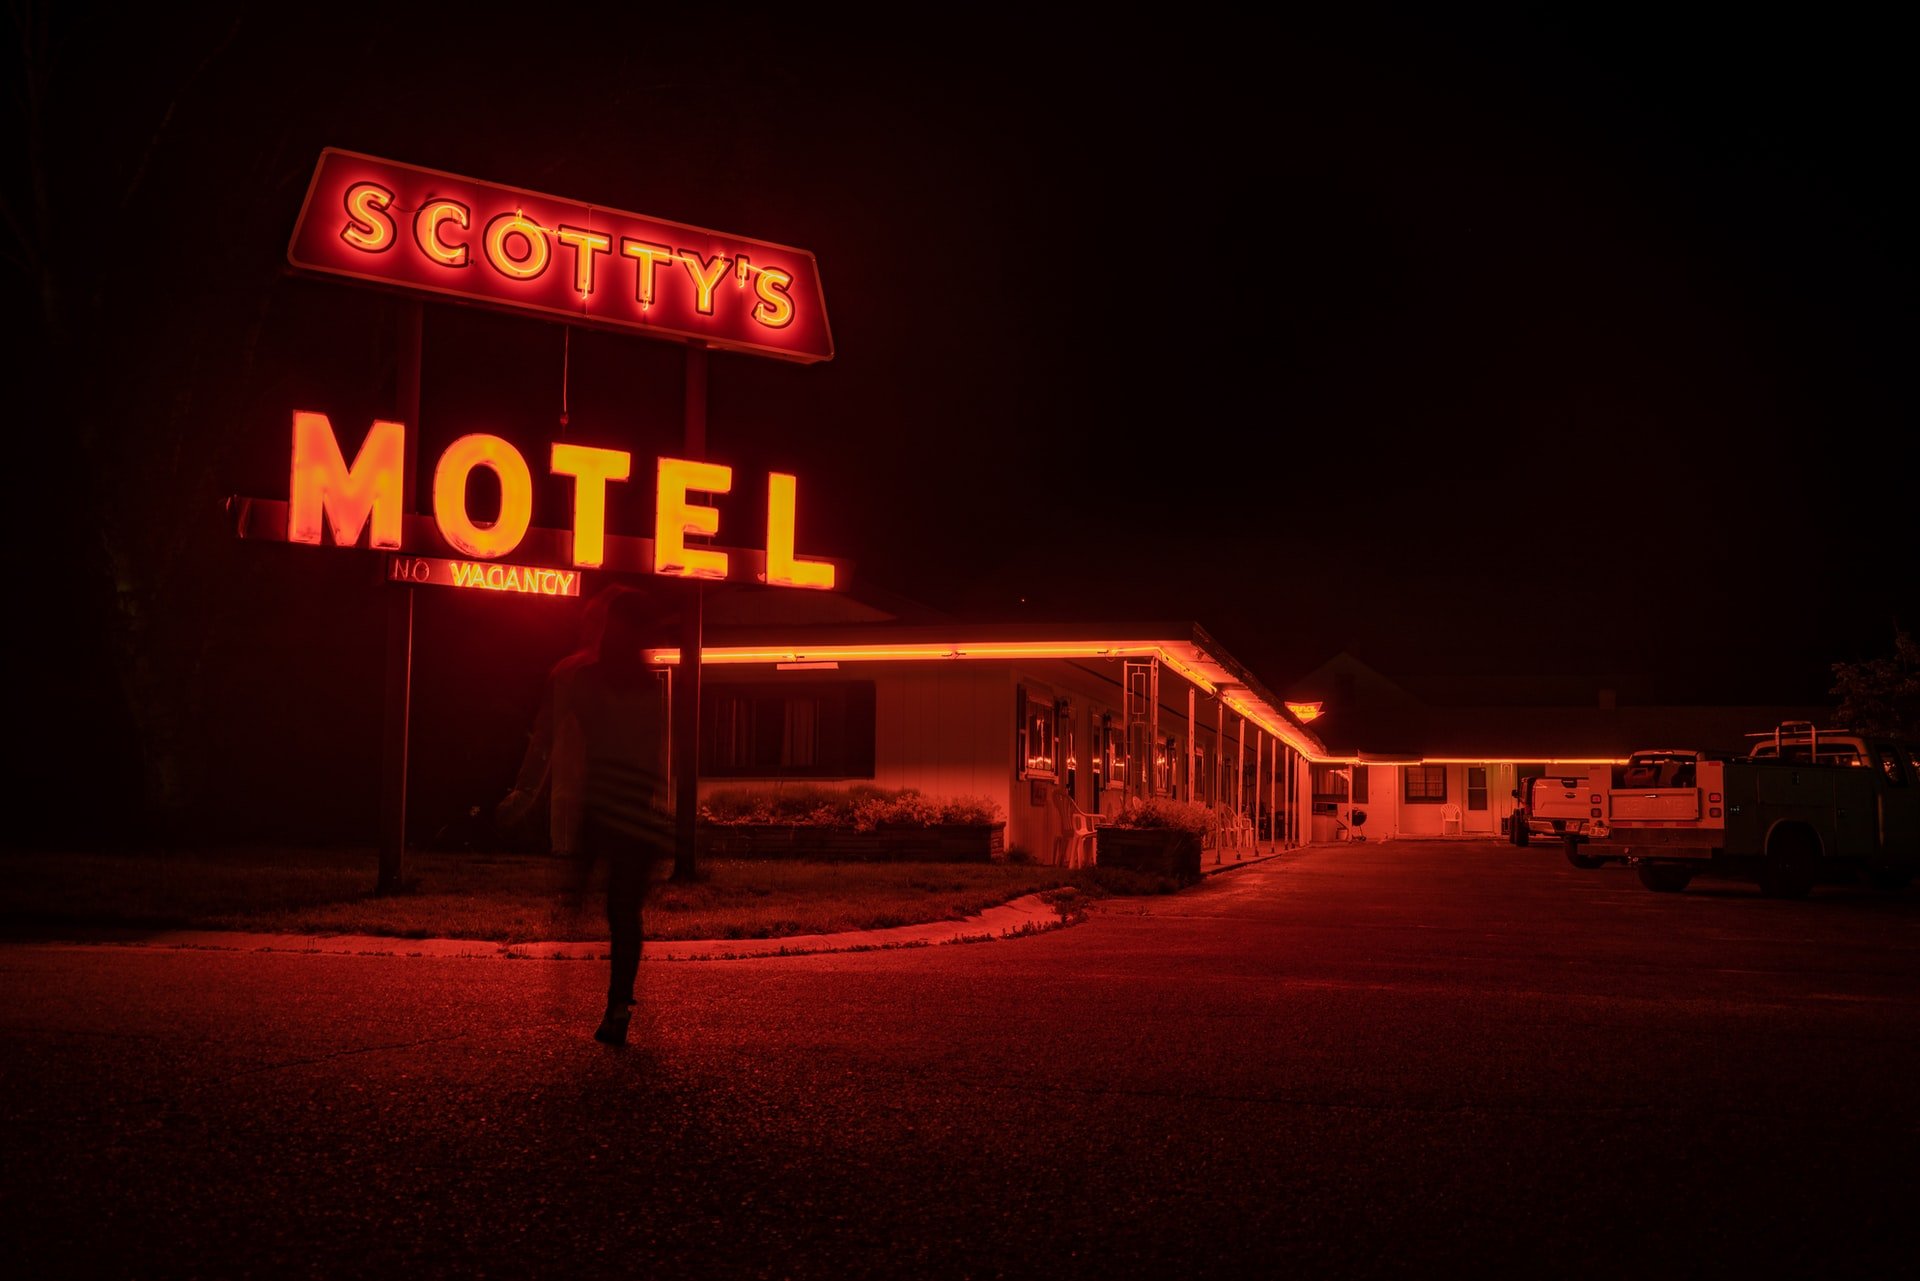 It was dark when they returned to the motel. | Source: Unsplash